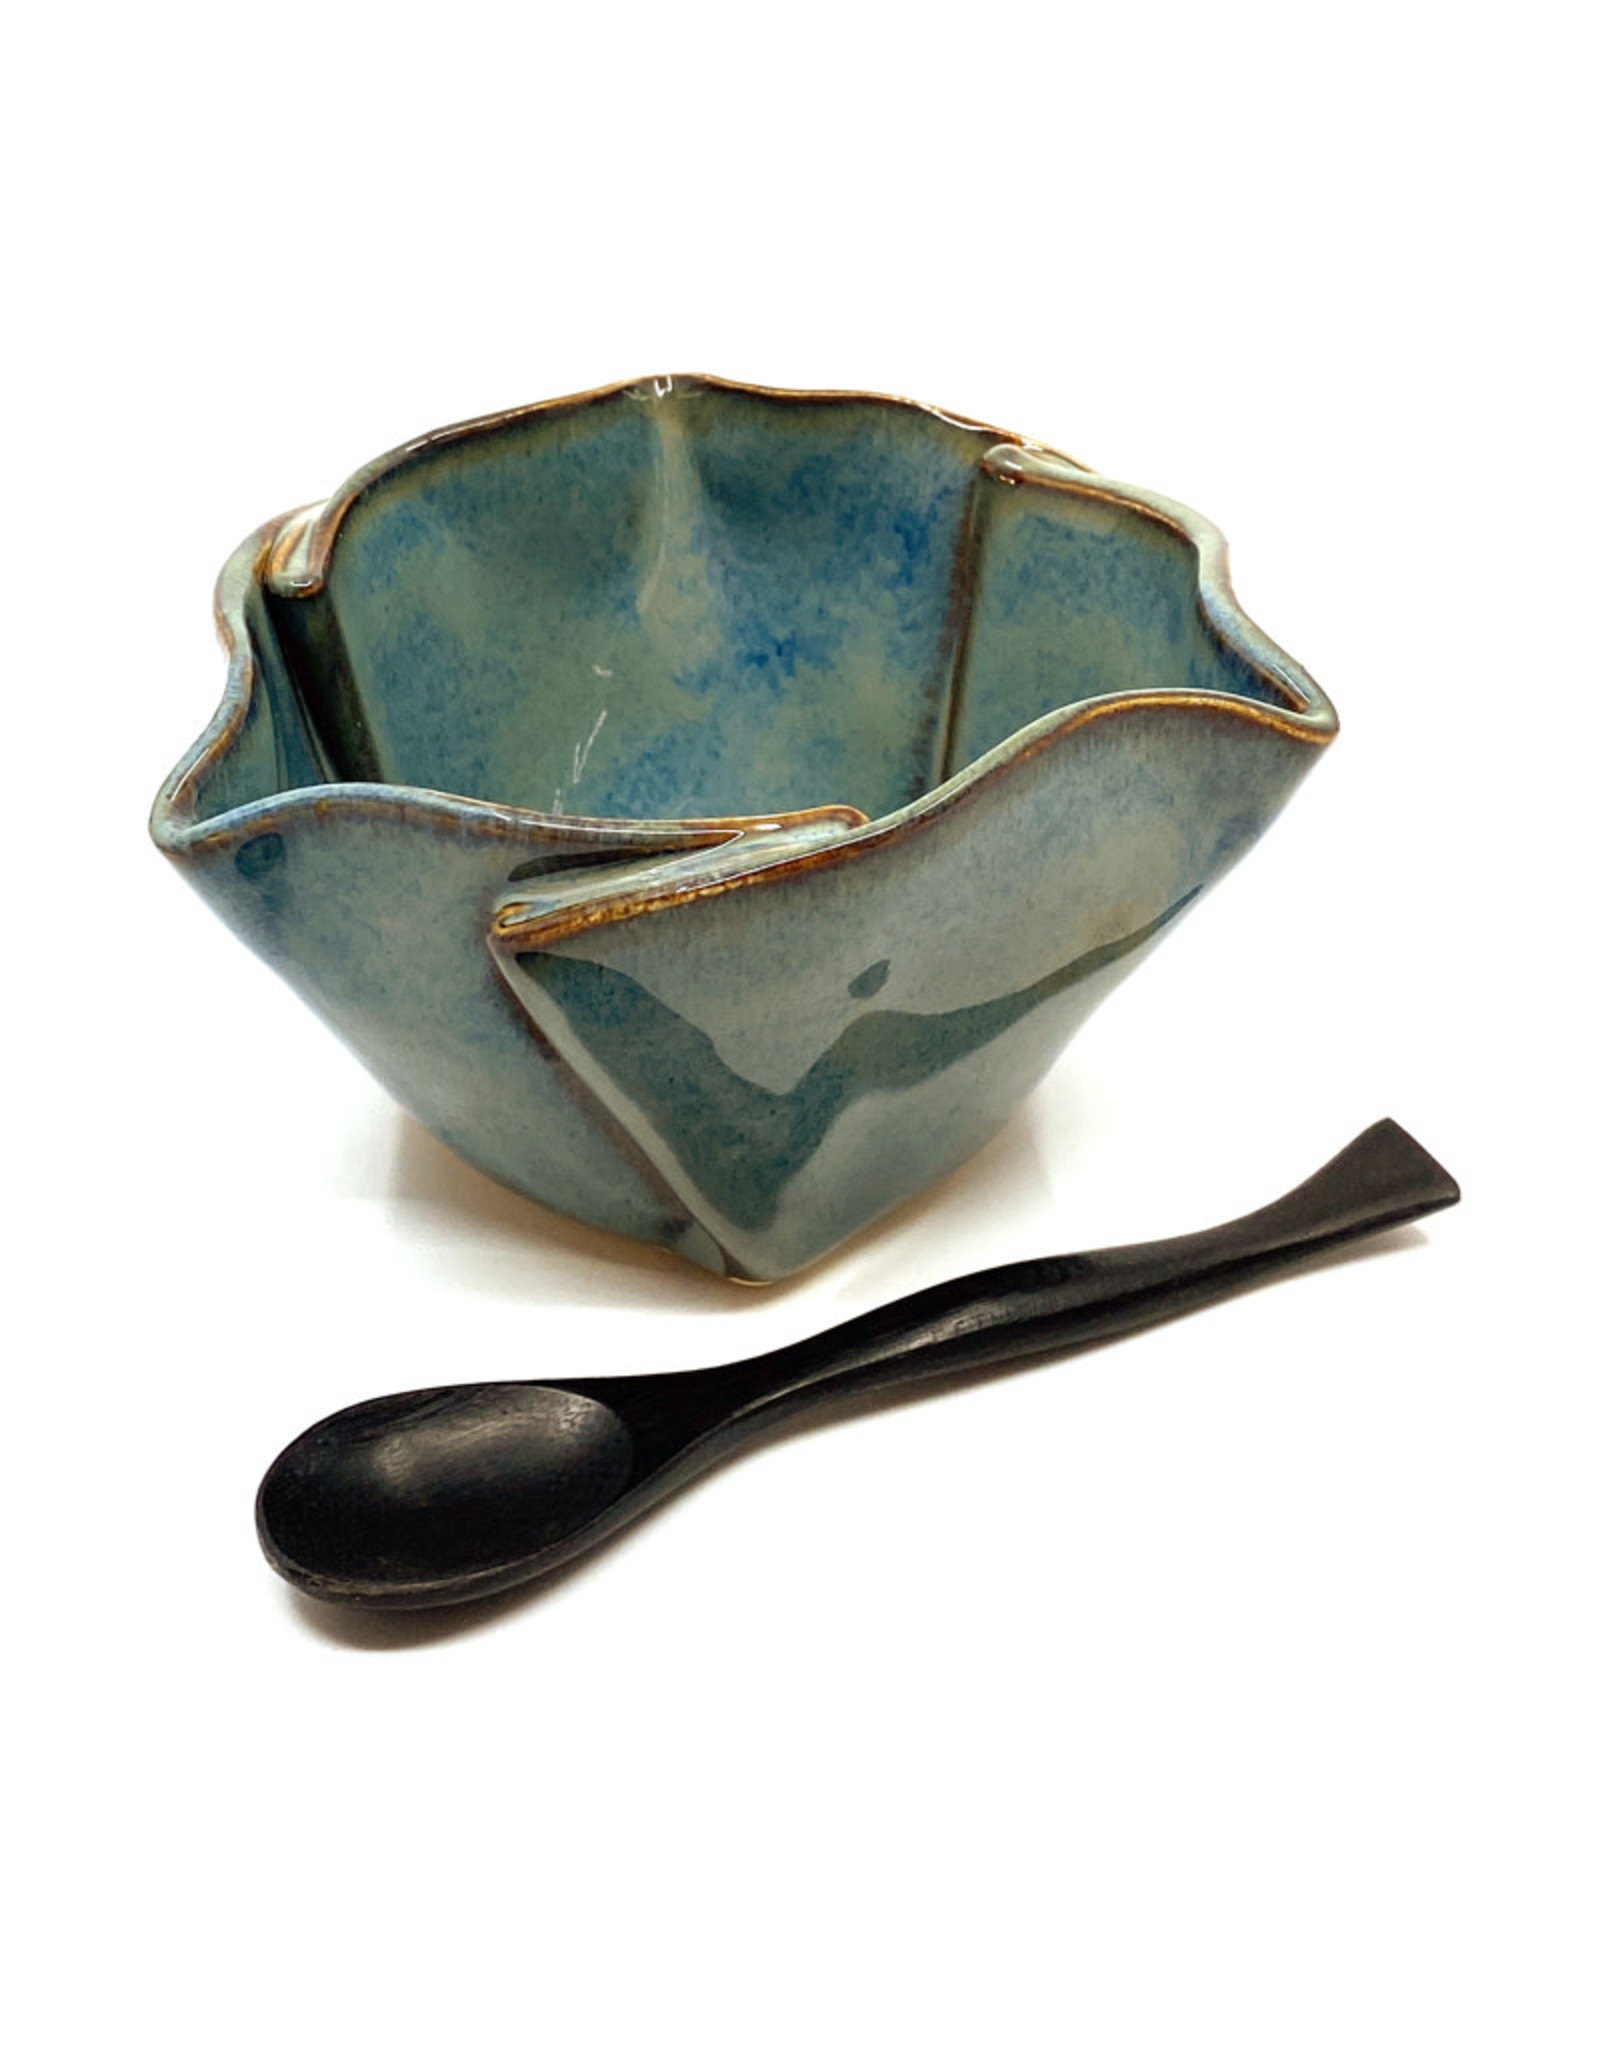 HILBORN POTTERY BLUE MEDLEY MULTI-PURPOSE DISH WITH SPOON